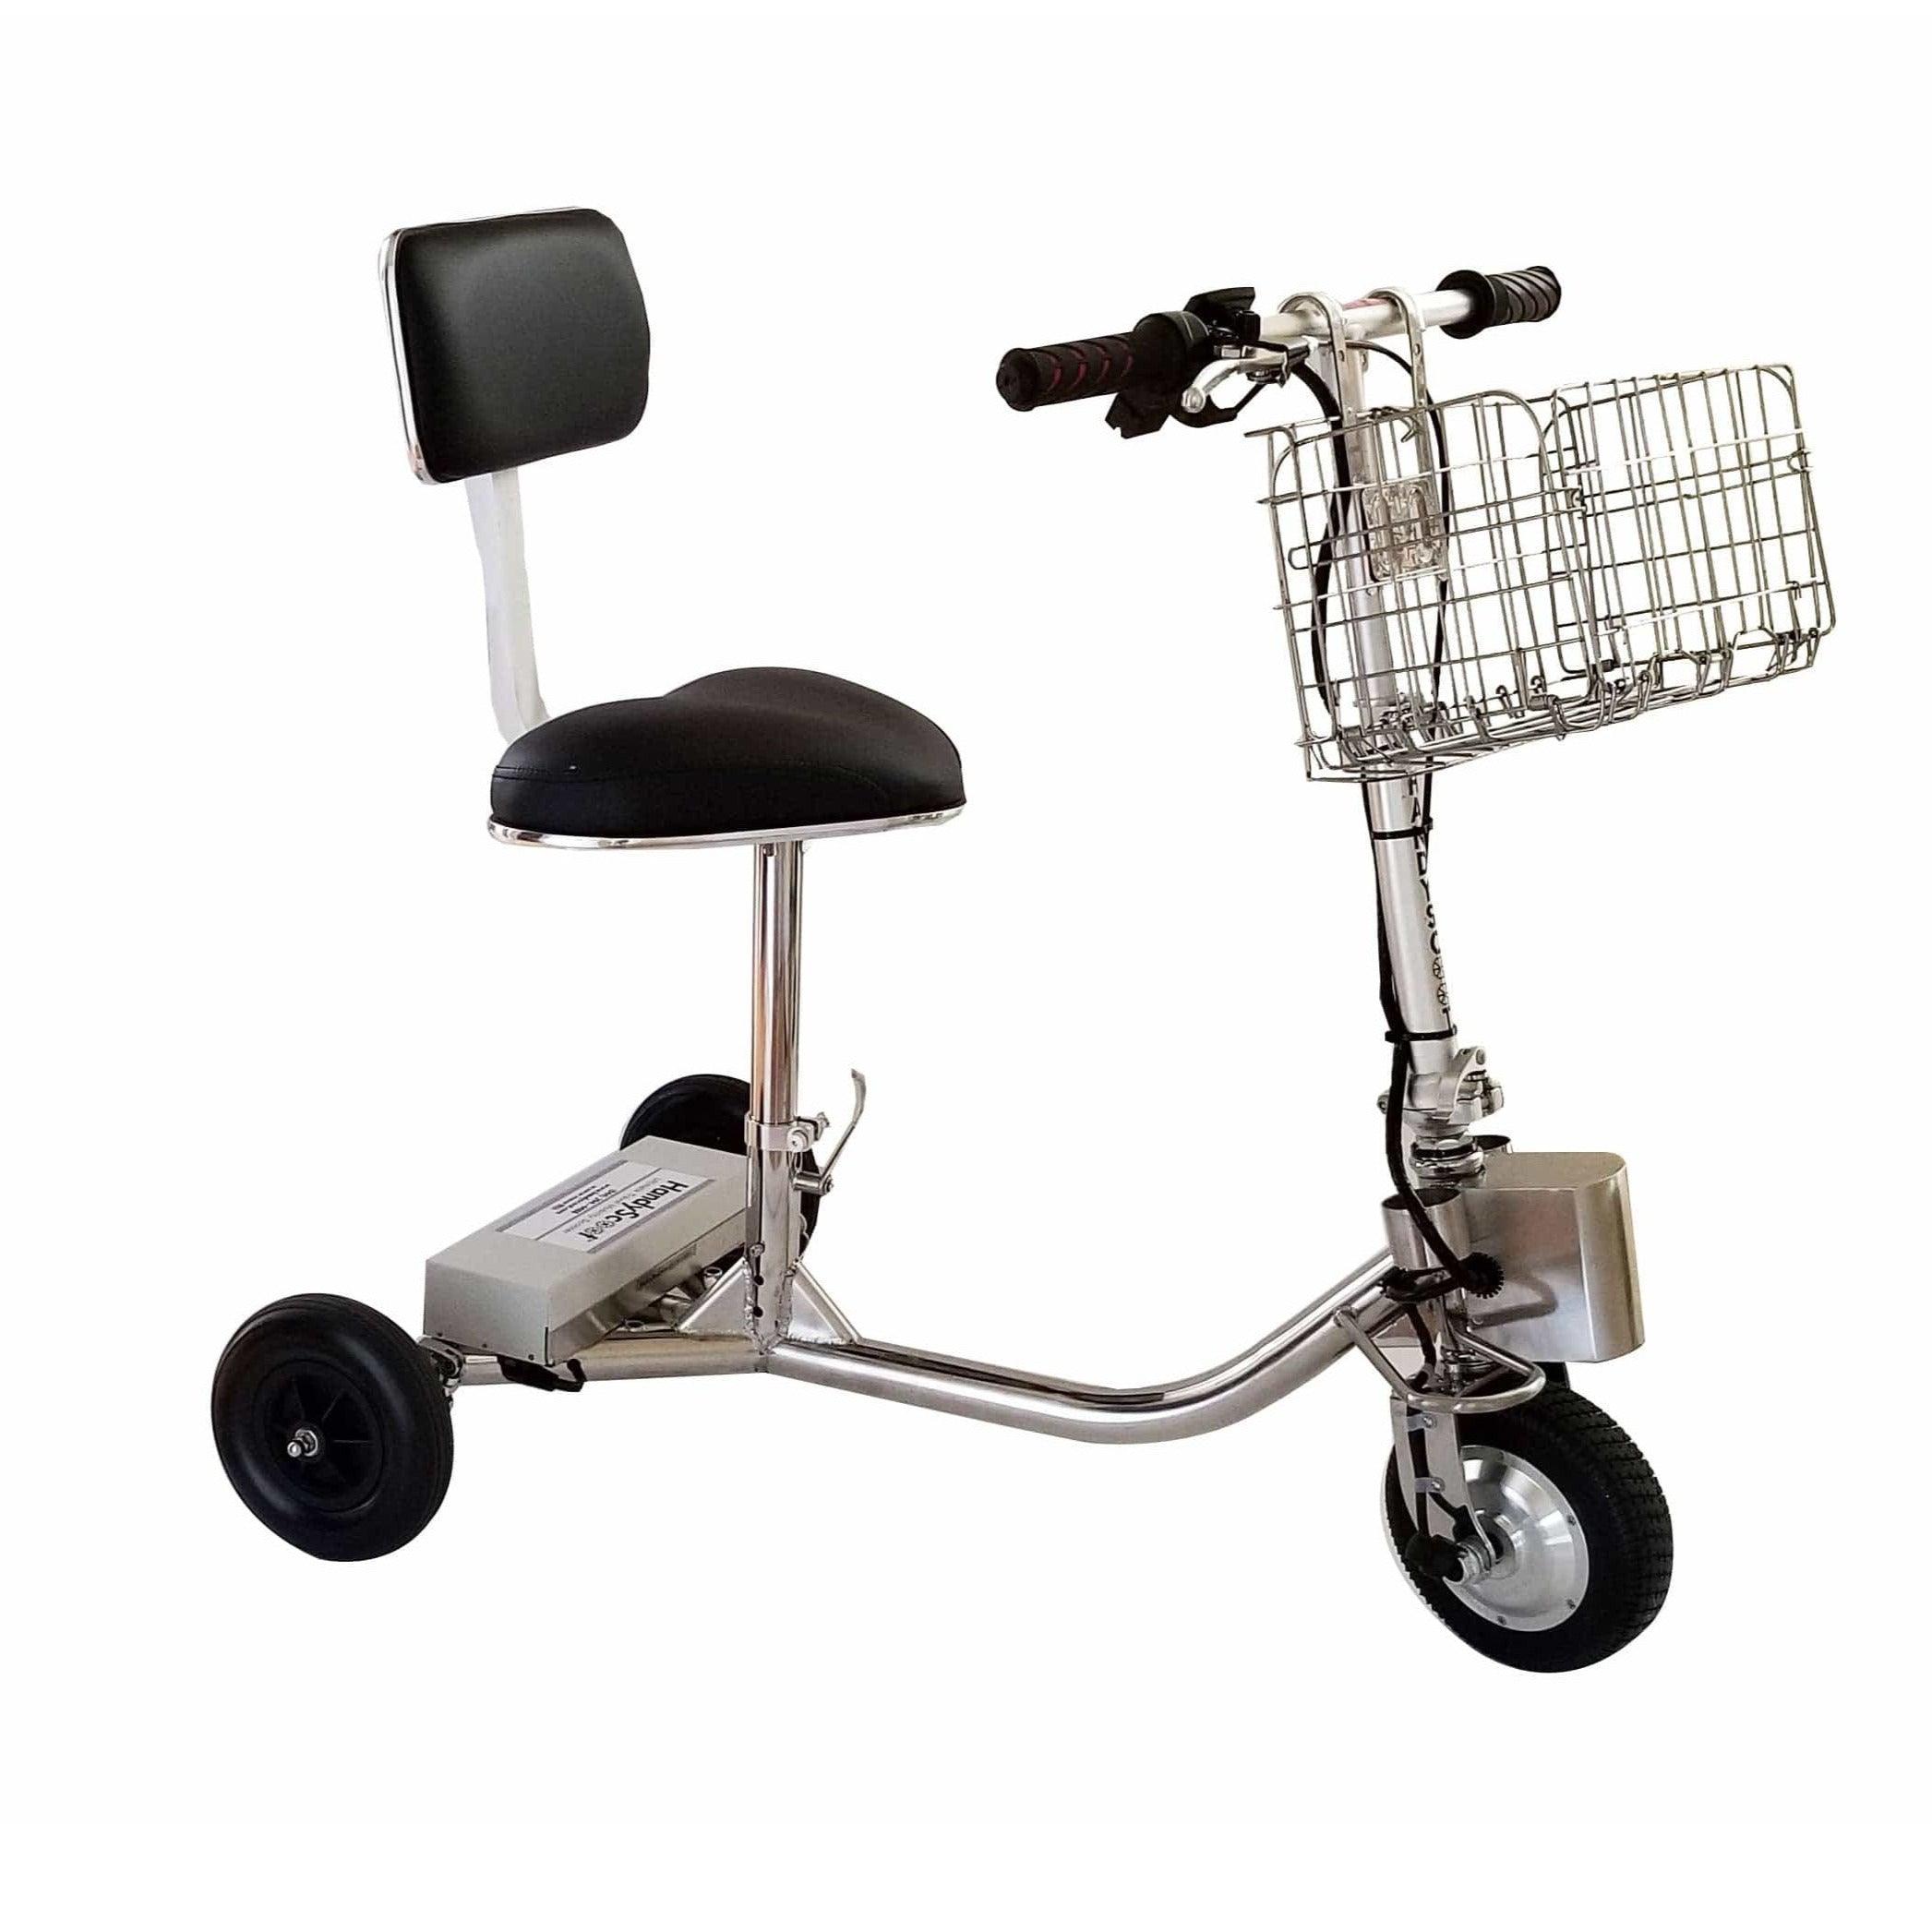 HandyScoot Lightweight Travel Foldable Mobility Scooter - Mobility Angel